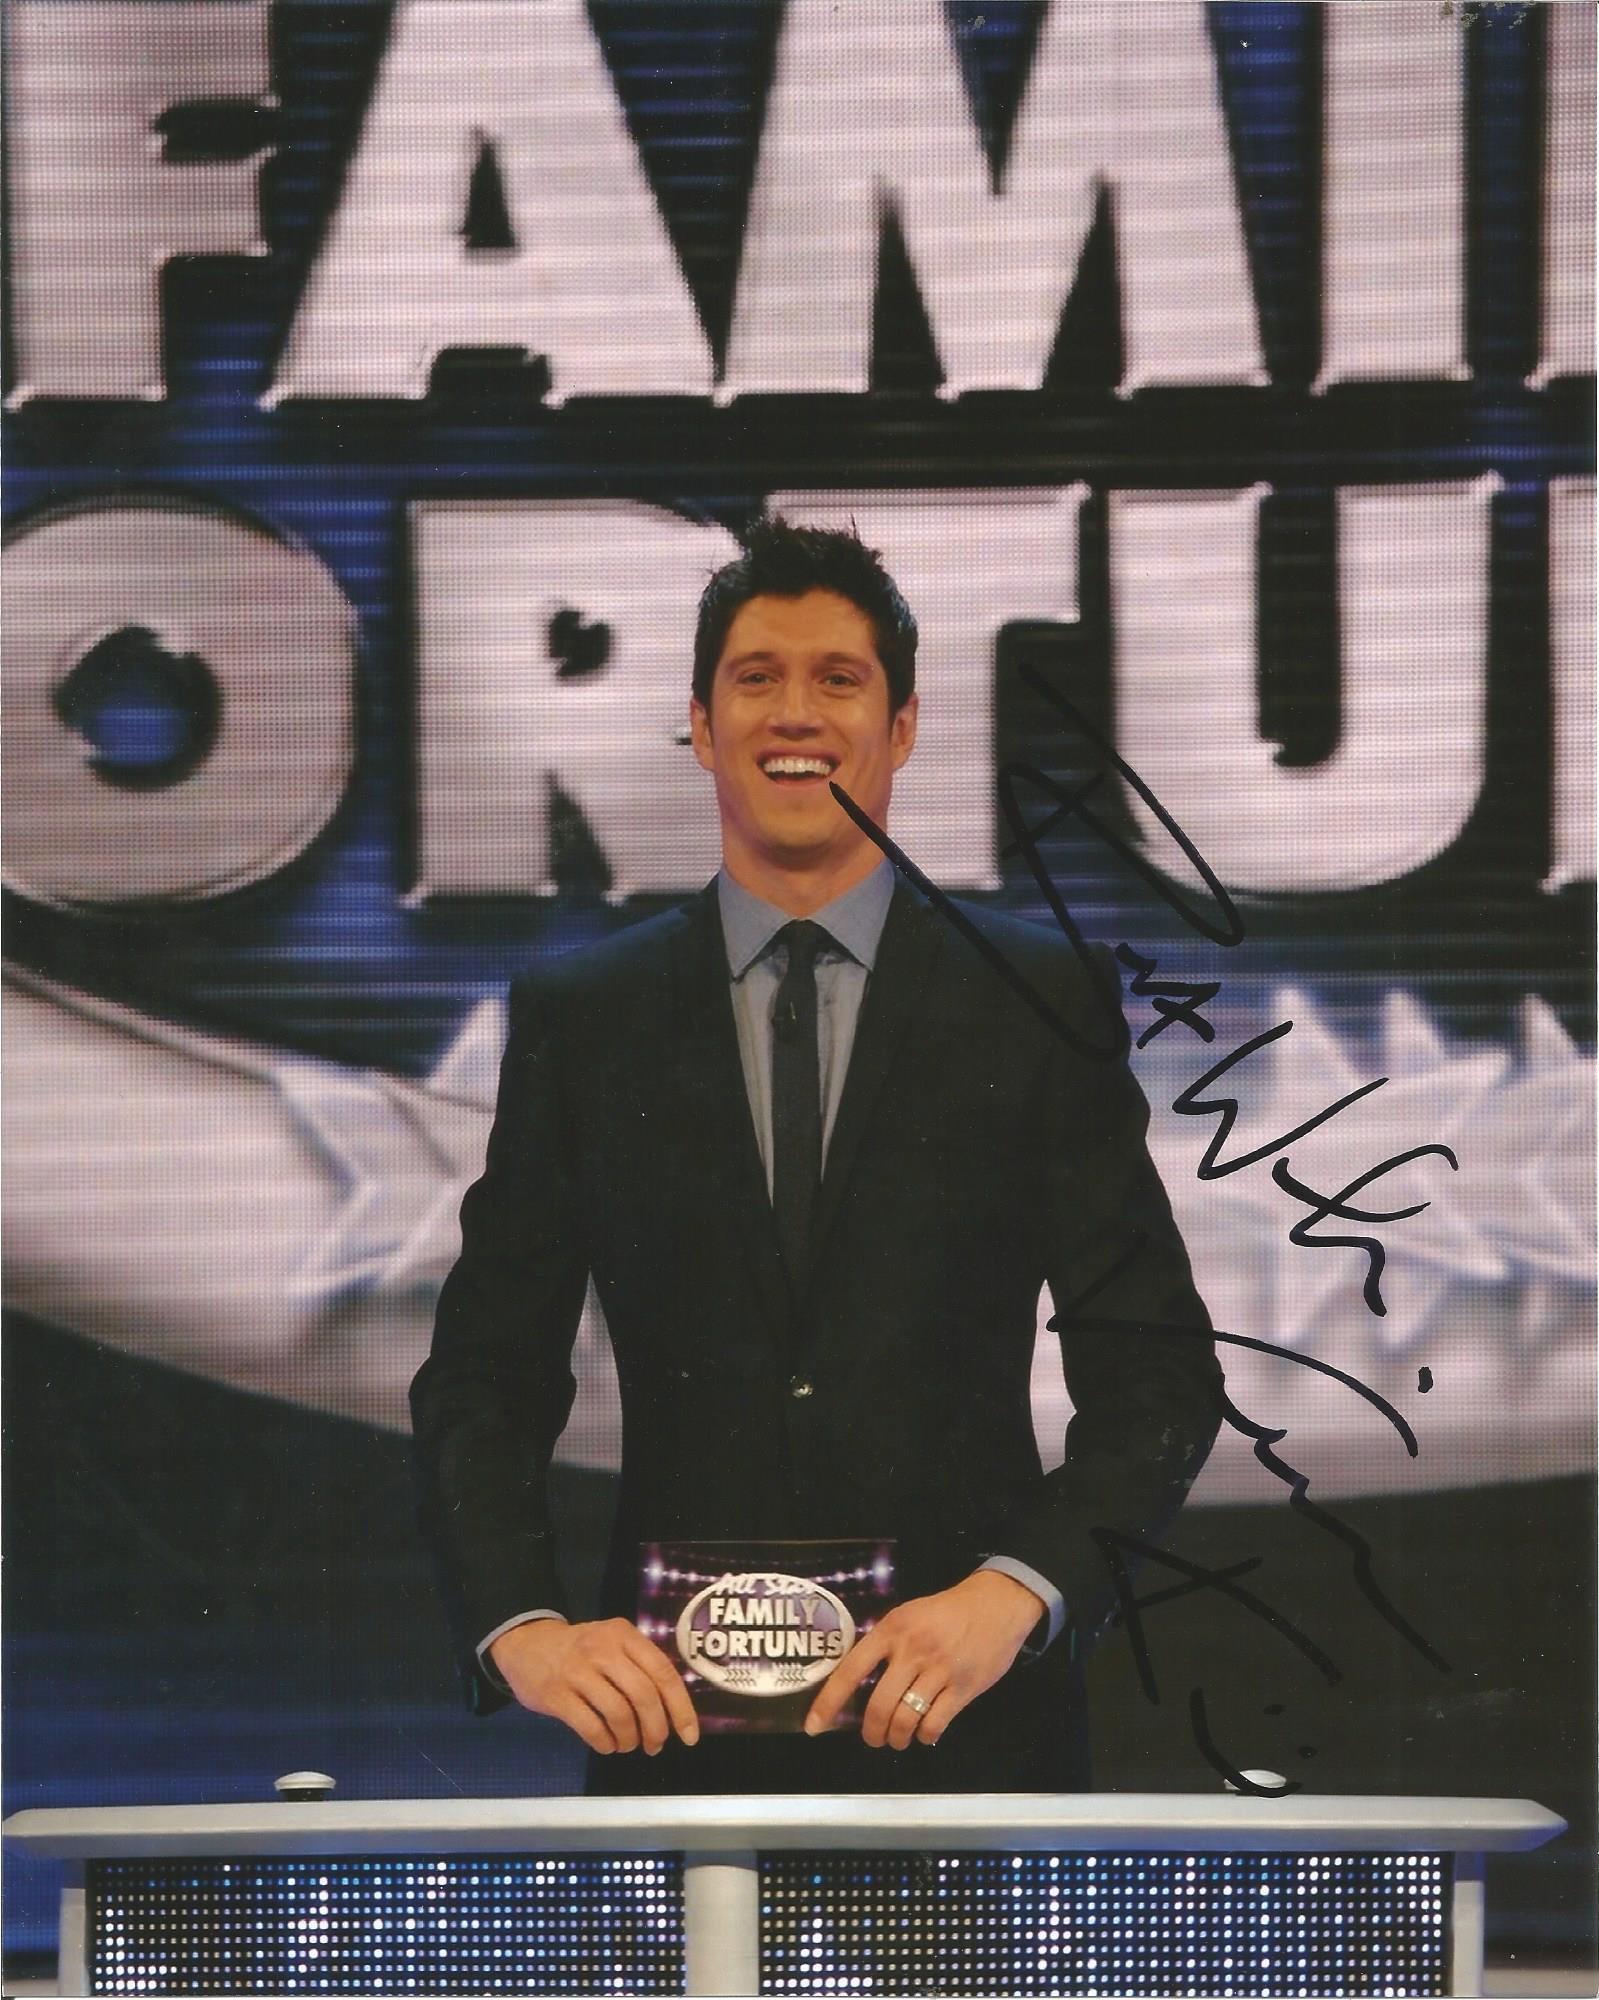 Vernon Kay Presenter Signed Family Fortunes 8x10 Photo. Good Condition. All signed pieces come